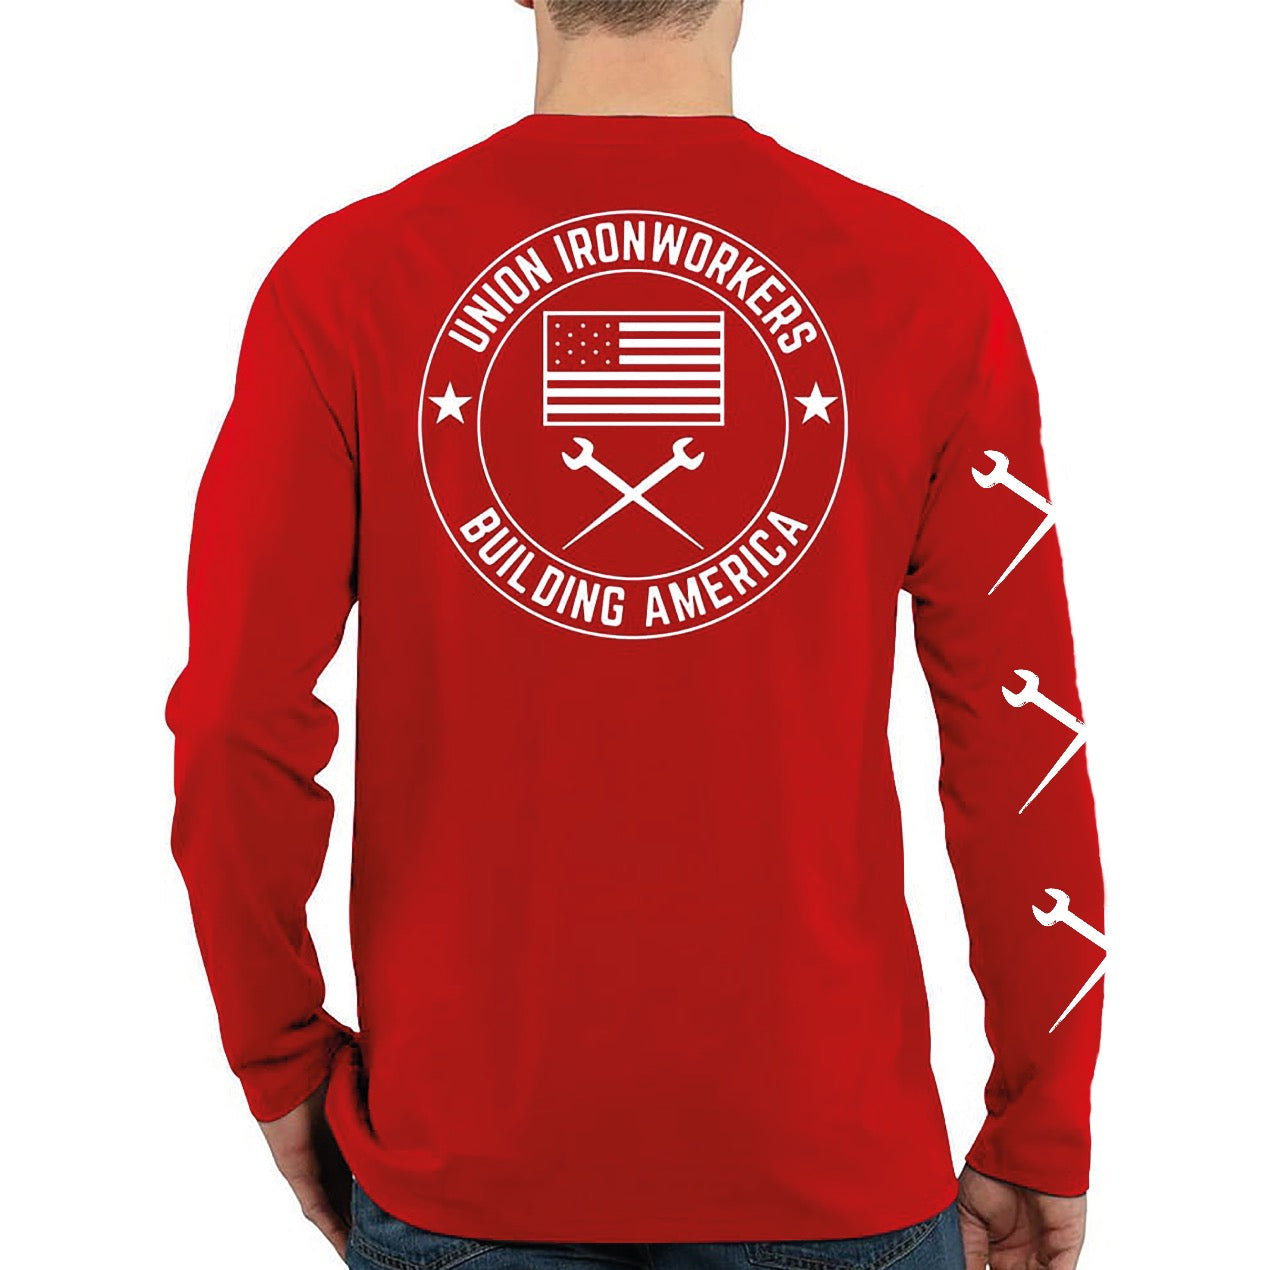 Union Ironworkers - Red Long Sleeve